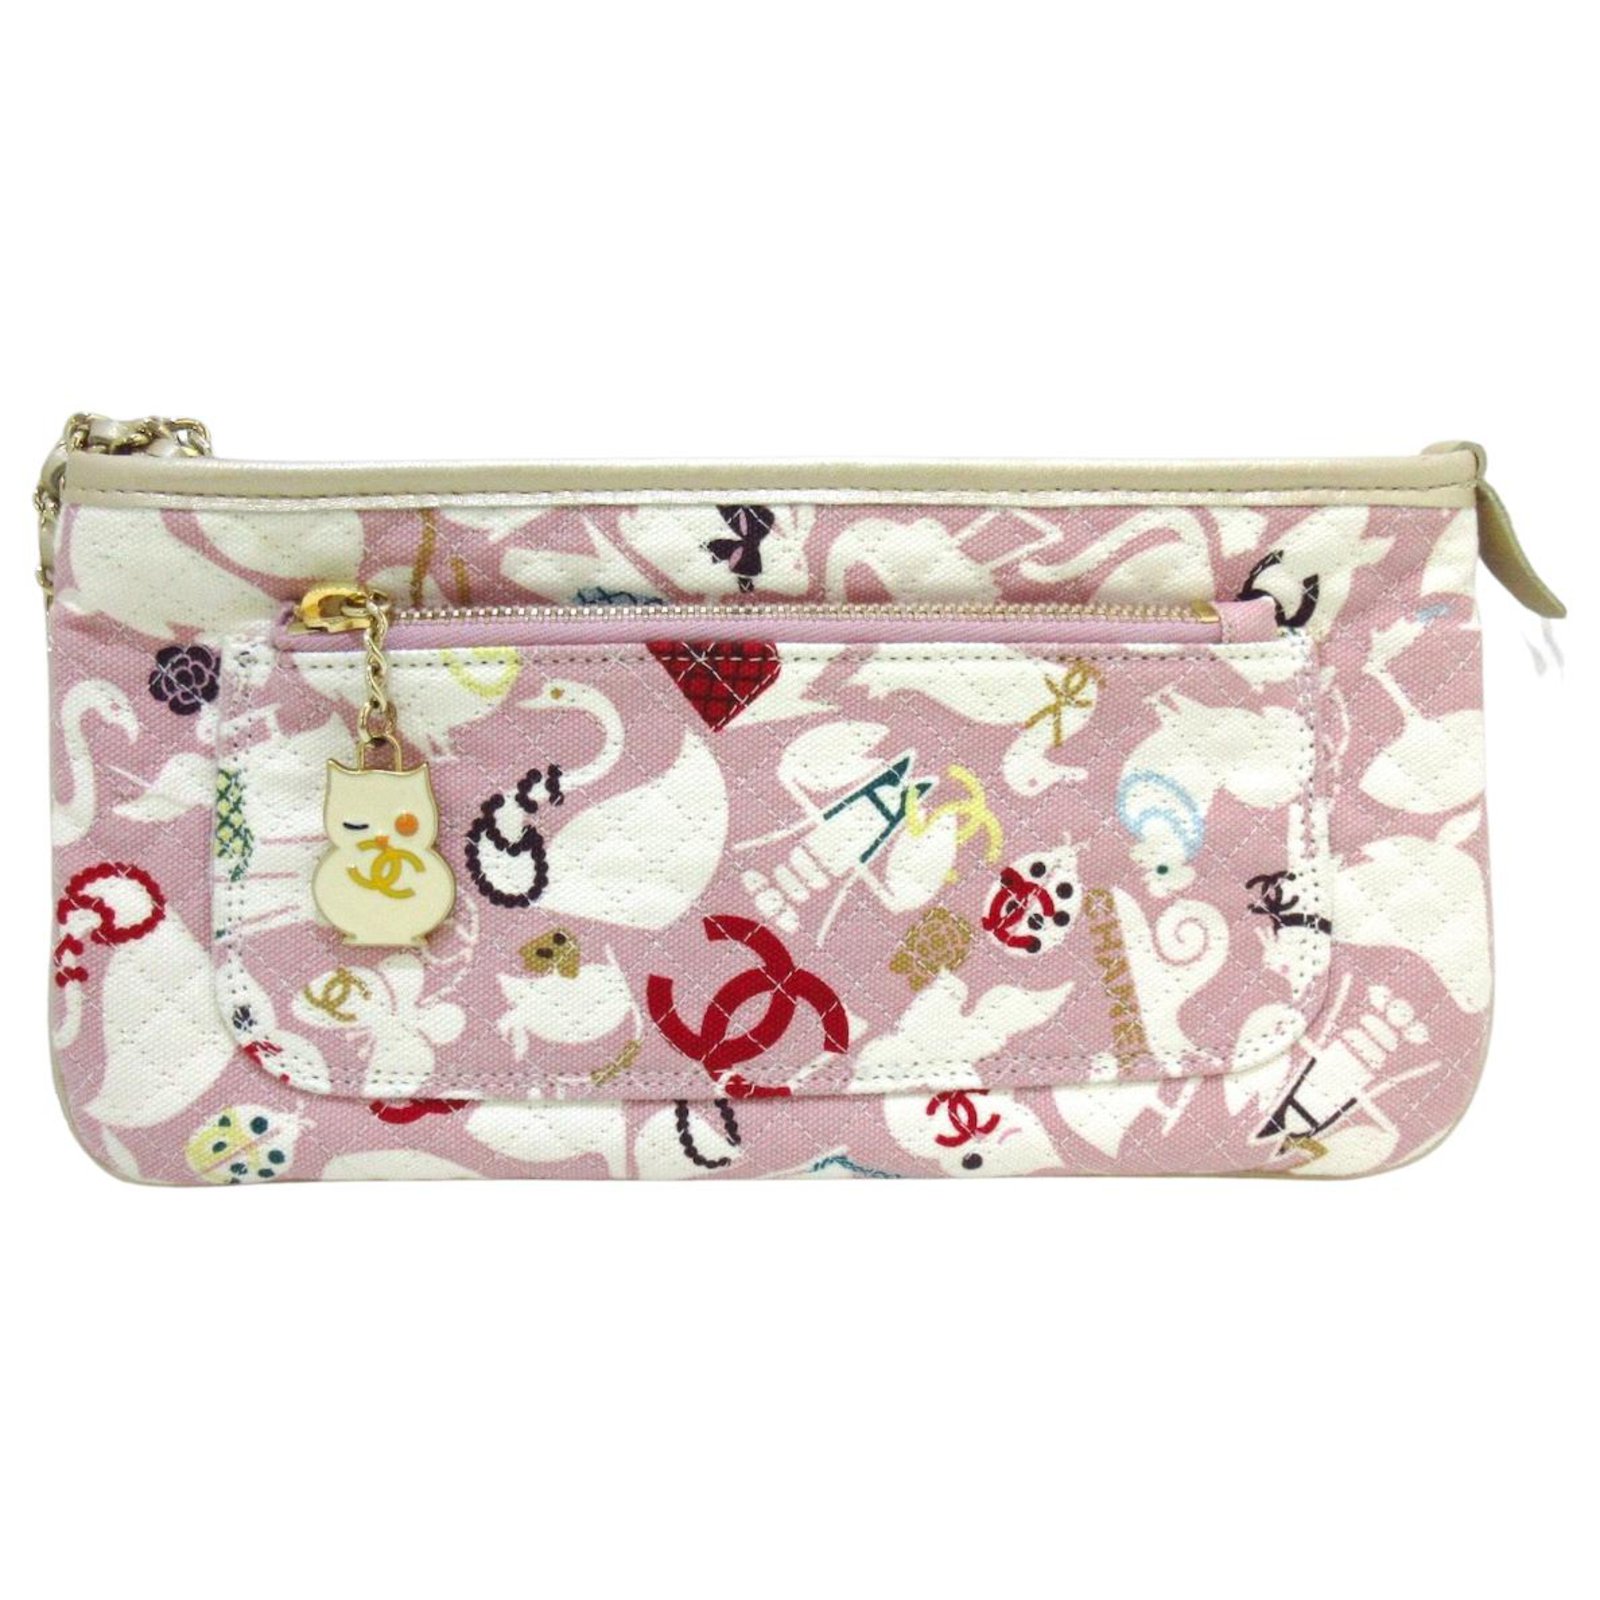 CHANEL Terry Cotton Baby Animals Diaper Bag Pink 43664